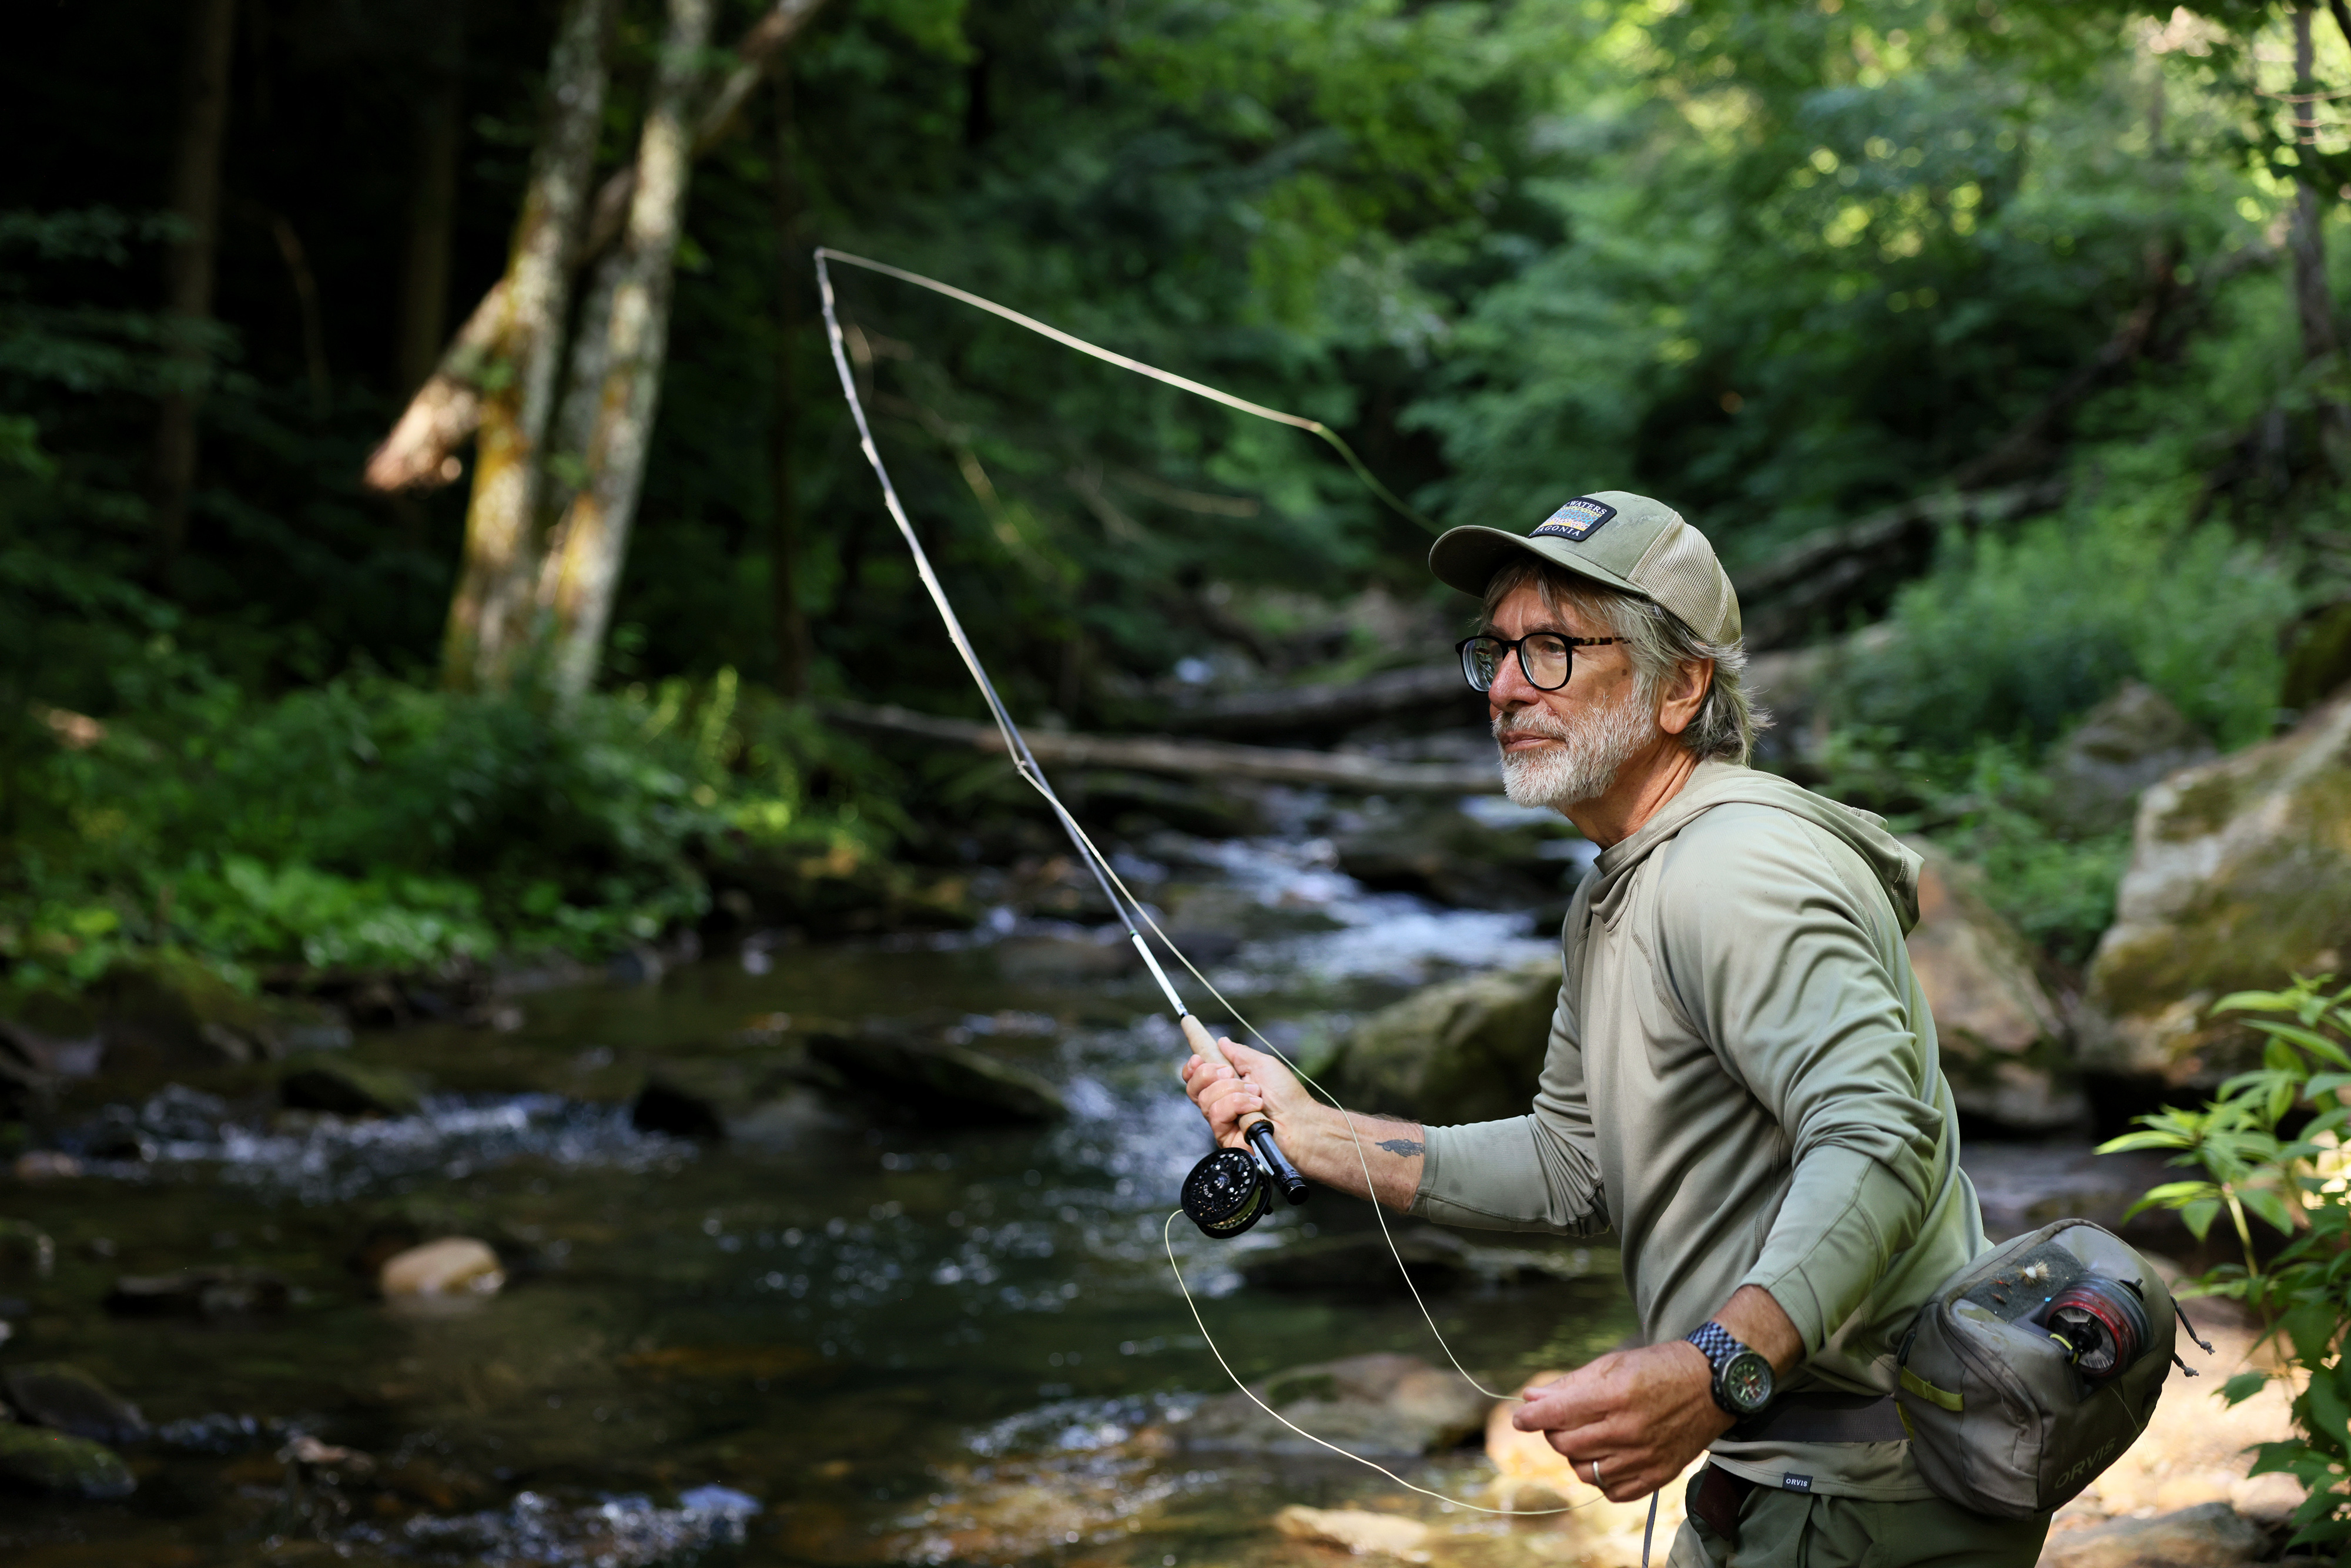 I shouldn't have called fly-fishing dumb - The Boston Globe